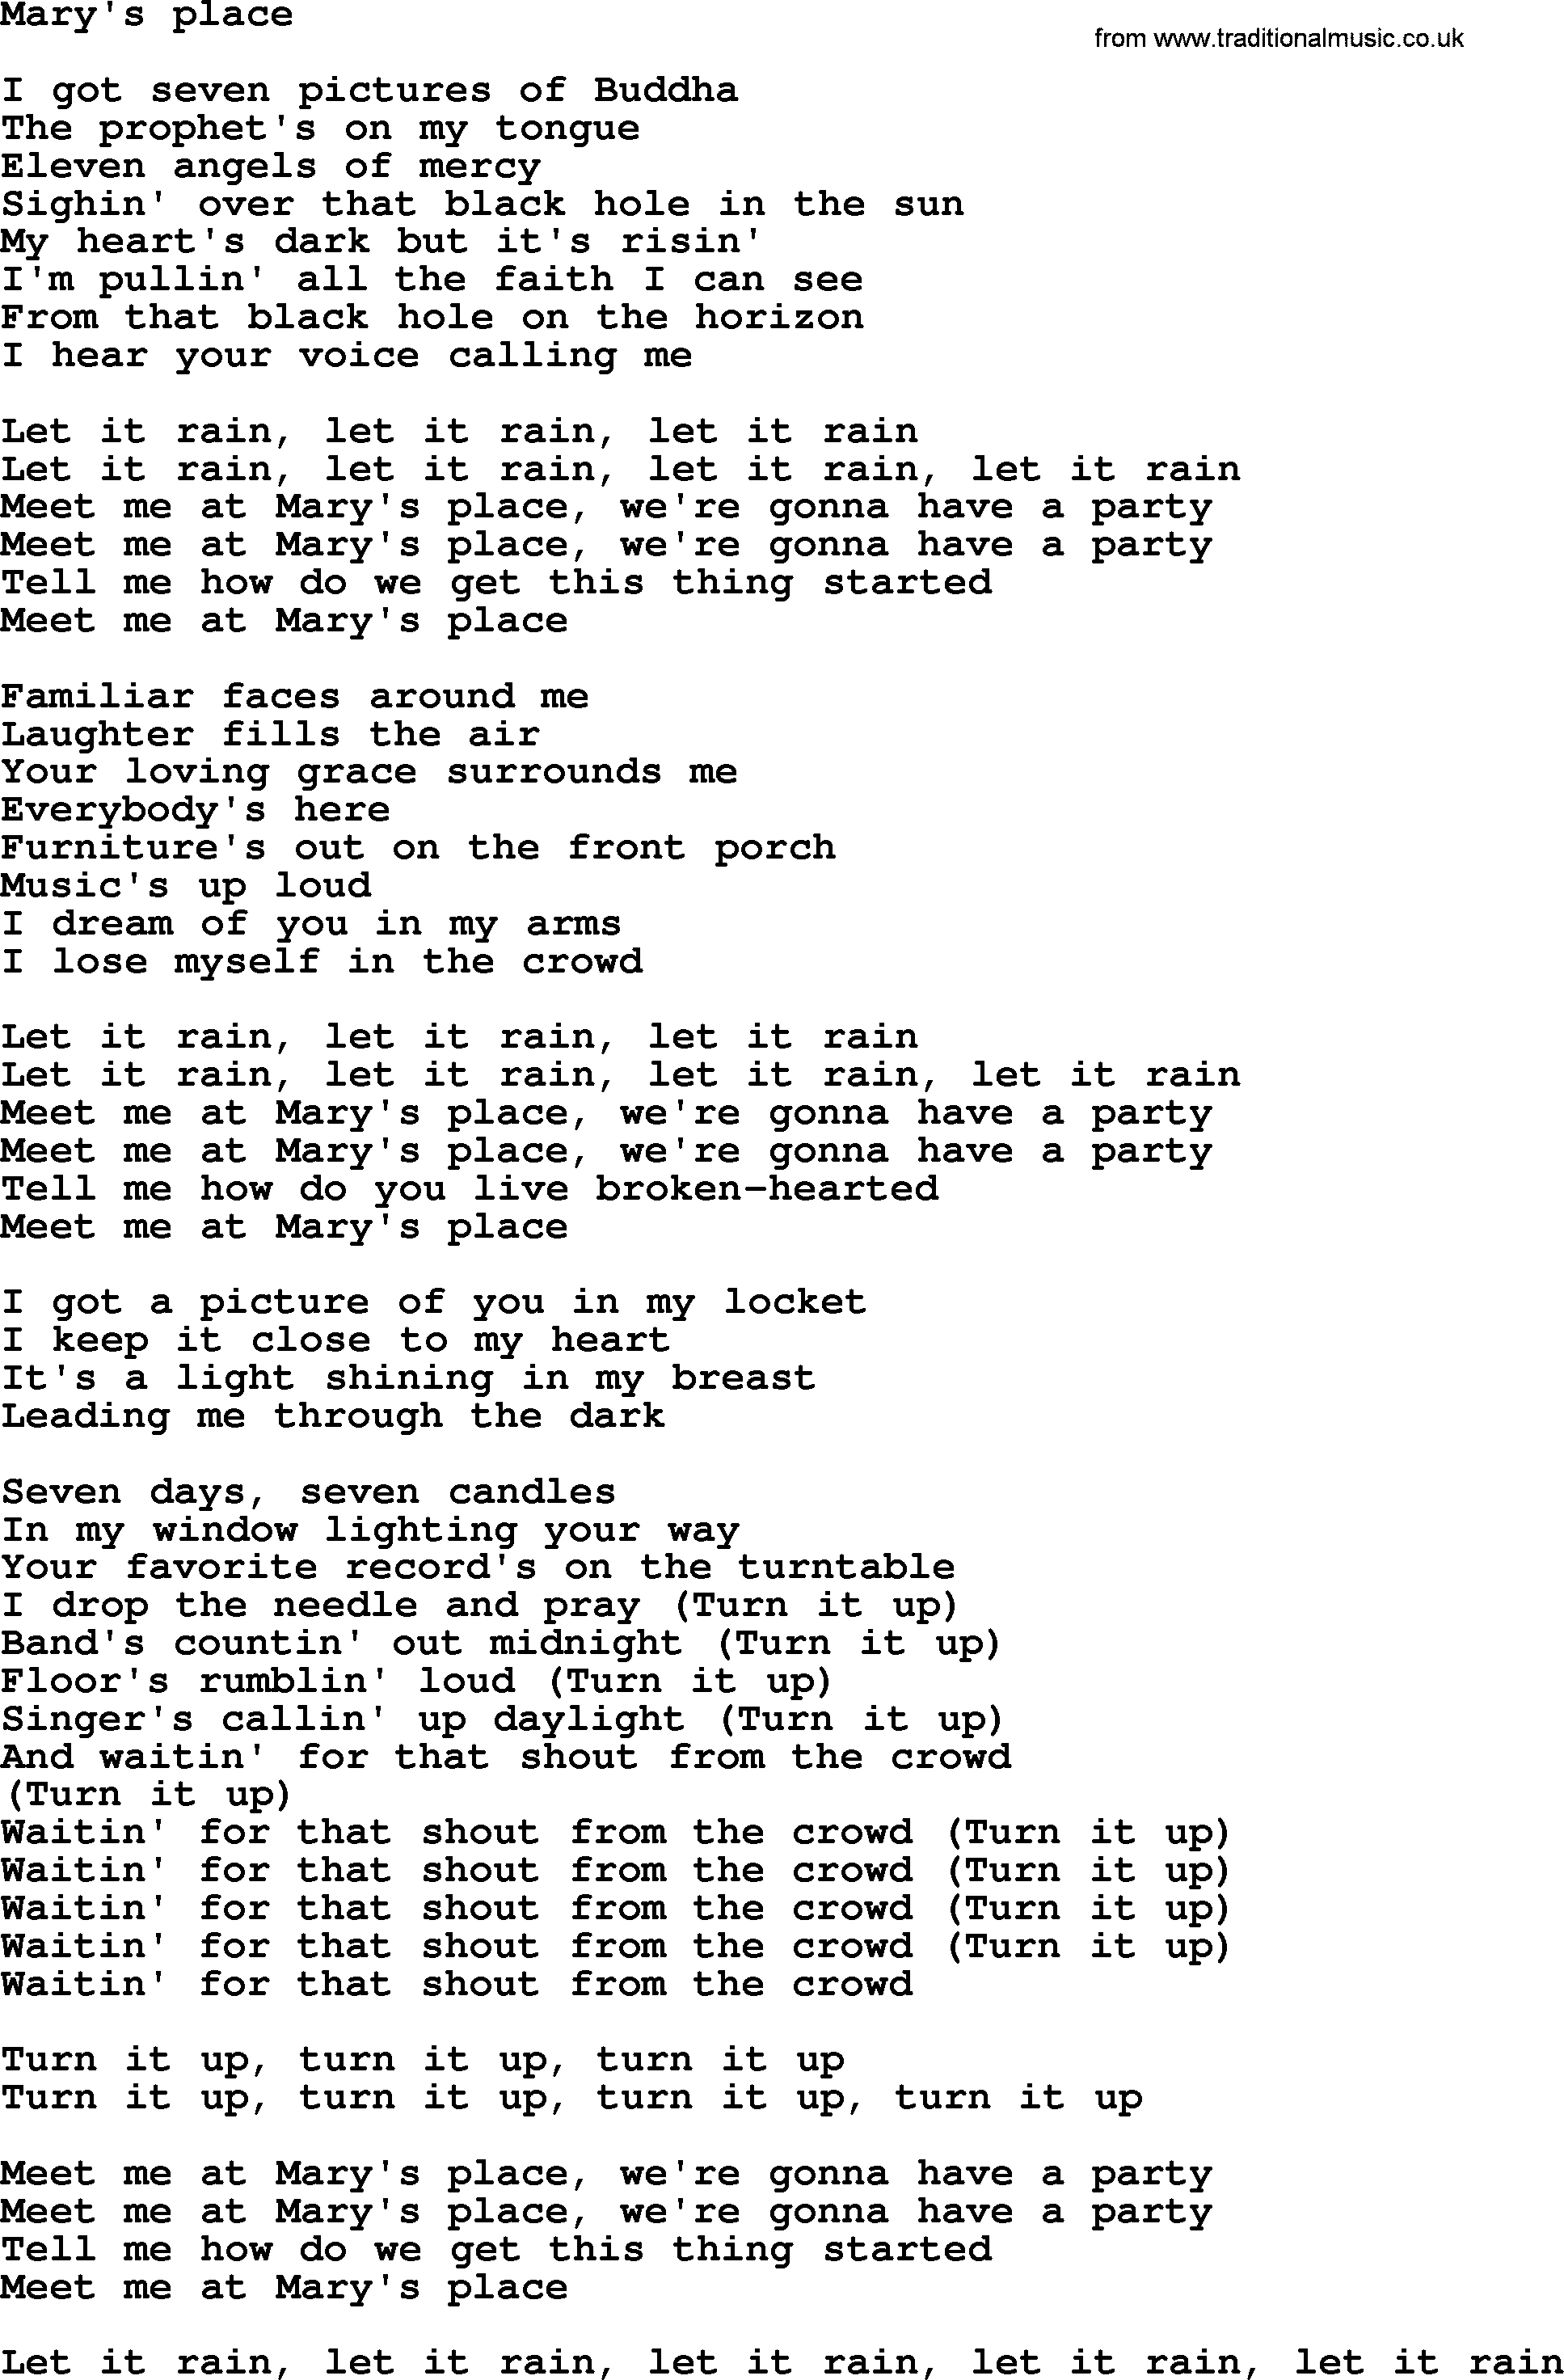 Bruce Springsteen song: Mary's Place lyrics